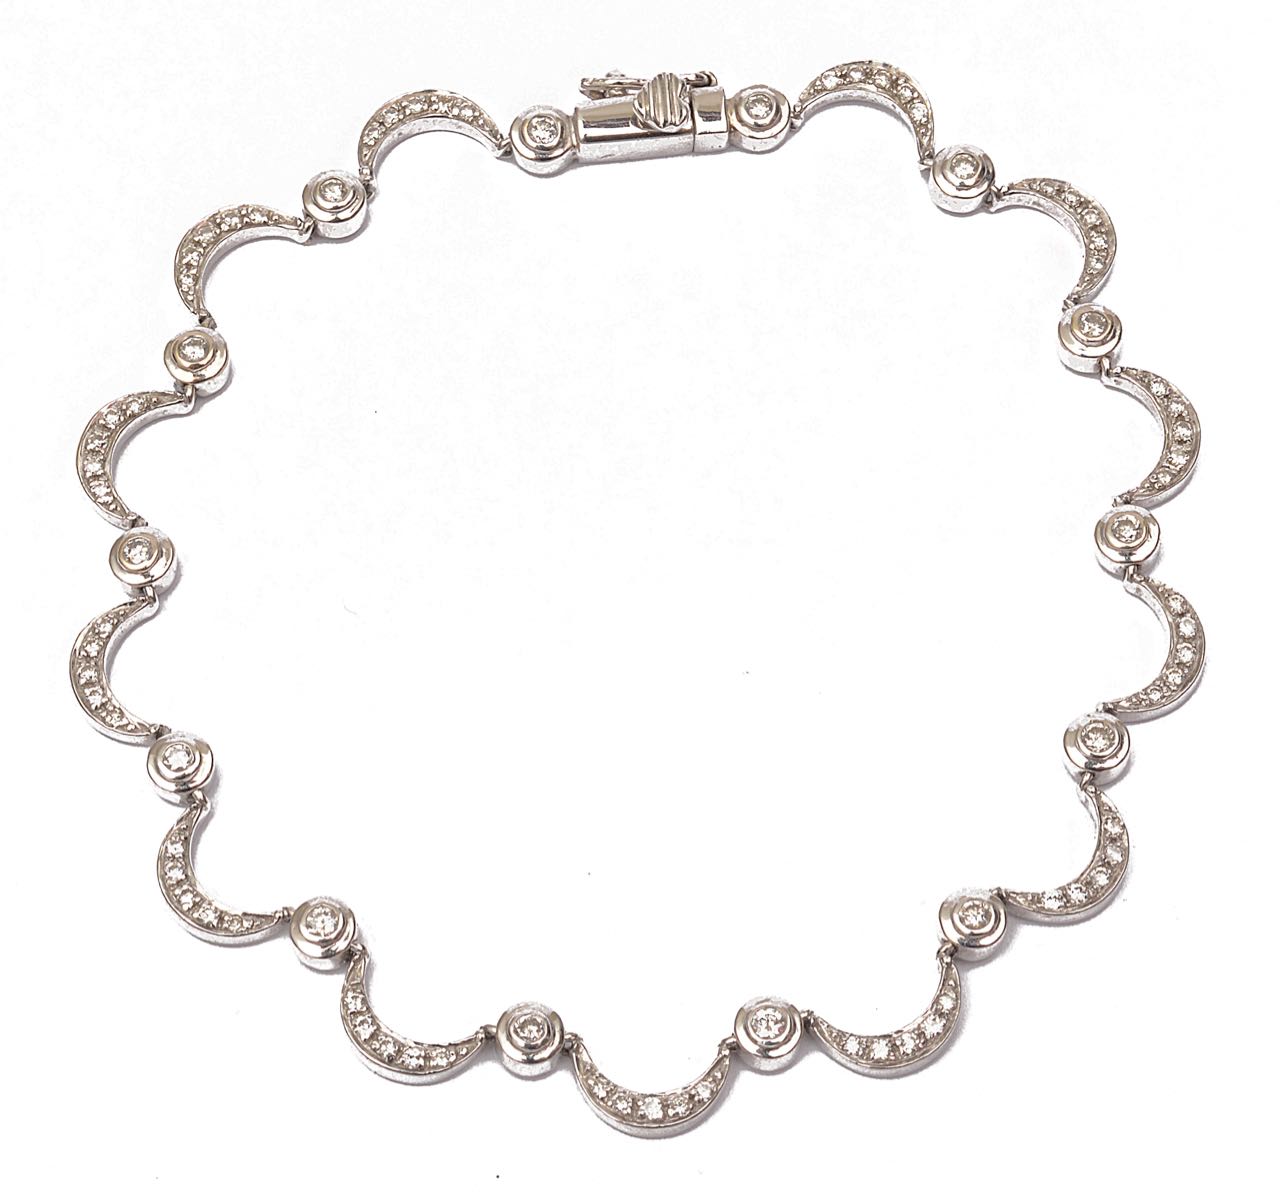 A delicate white gold and diamond set bracelet - Image 2 of 2